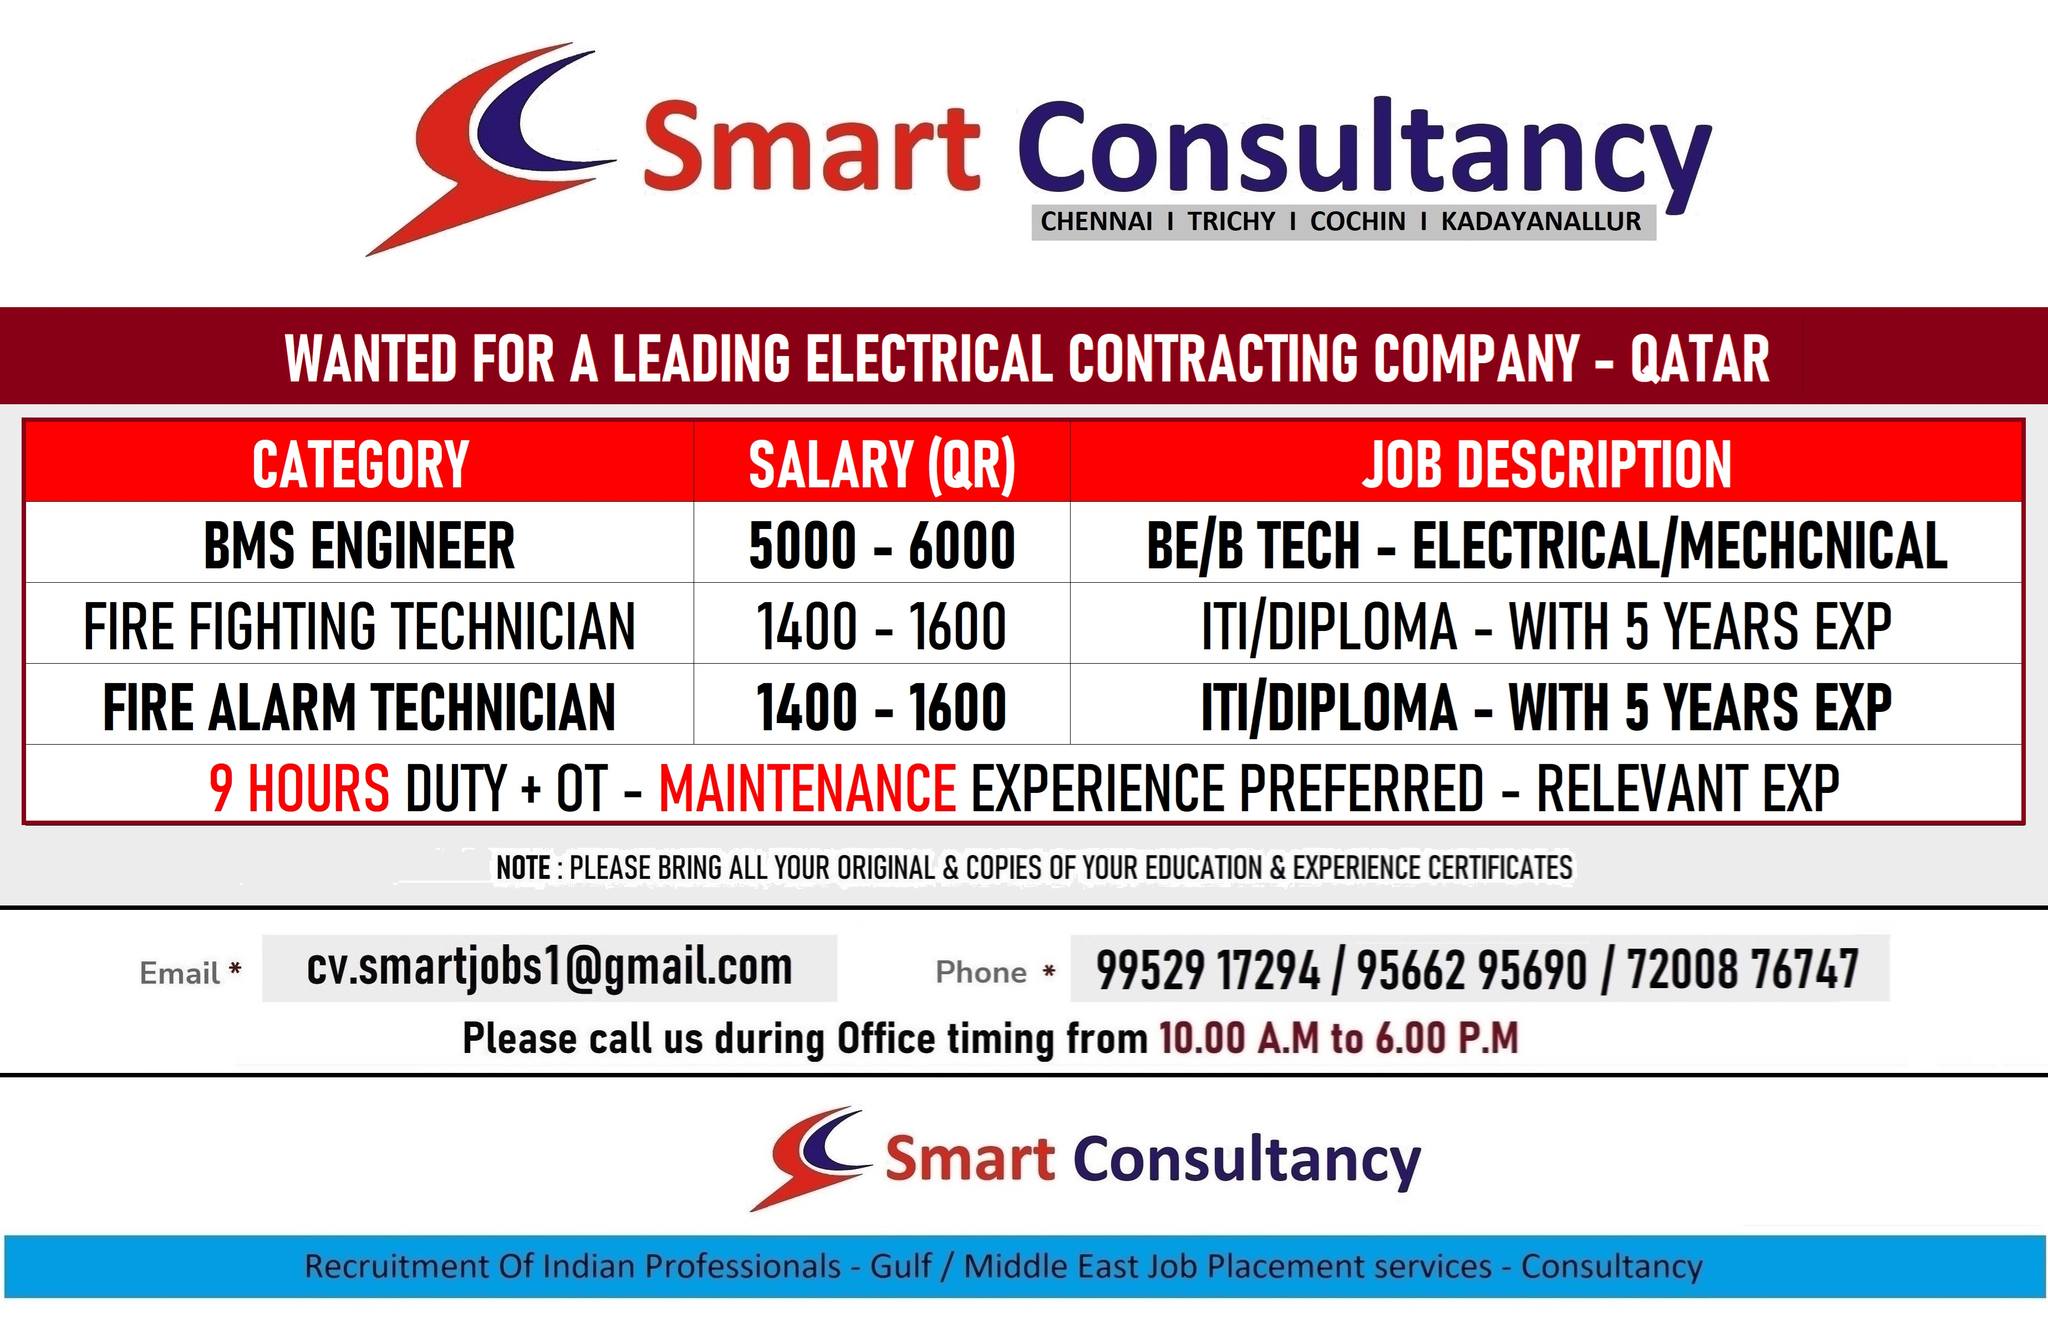 WANTED FOR A LEADING ELECTRICAL CONTRACTING COMPANY – QATAR